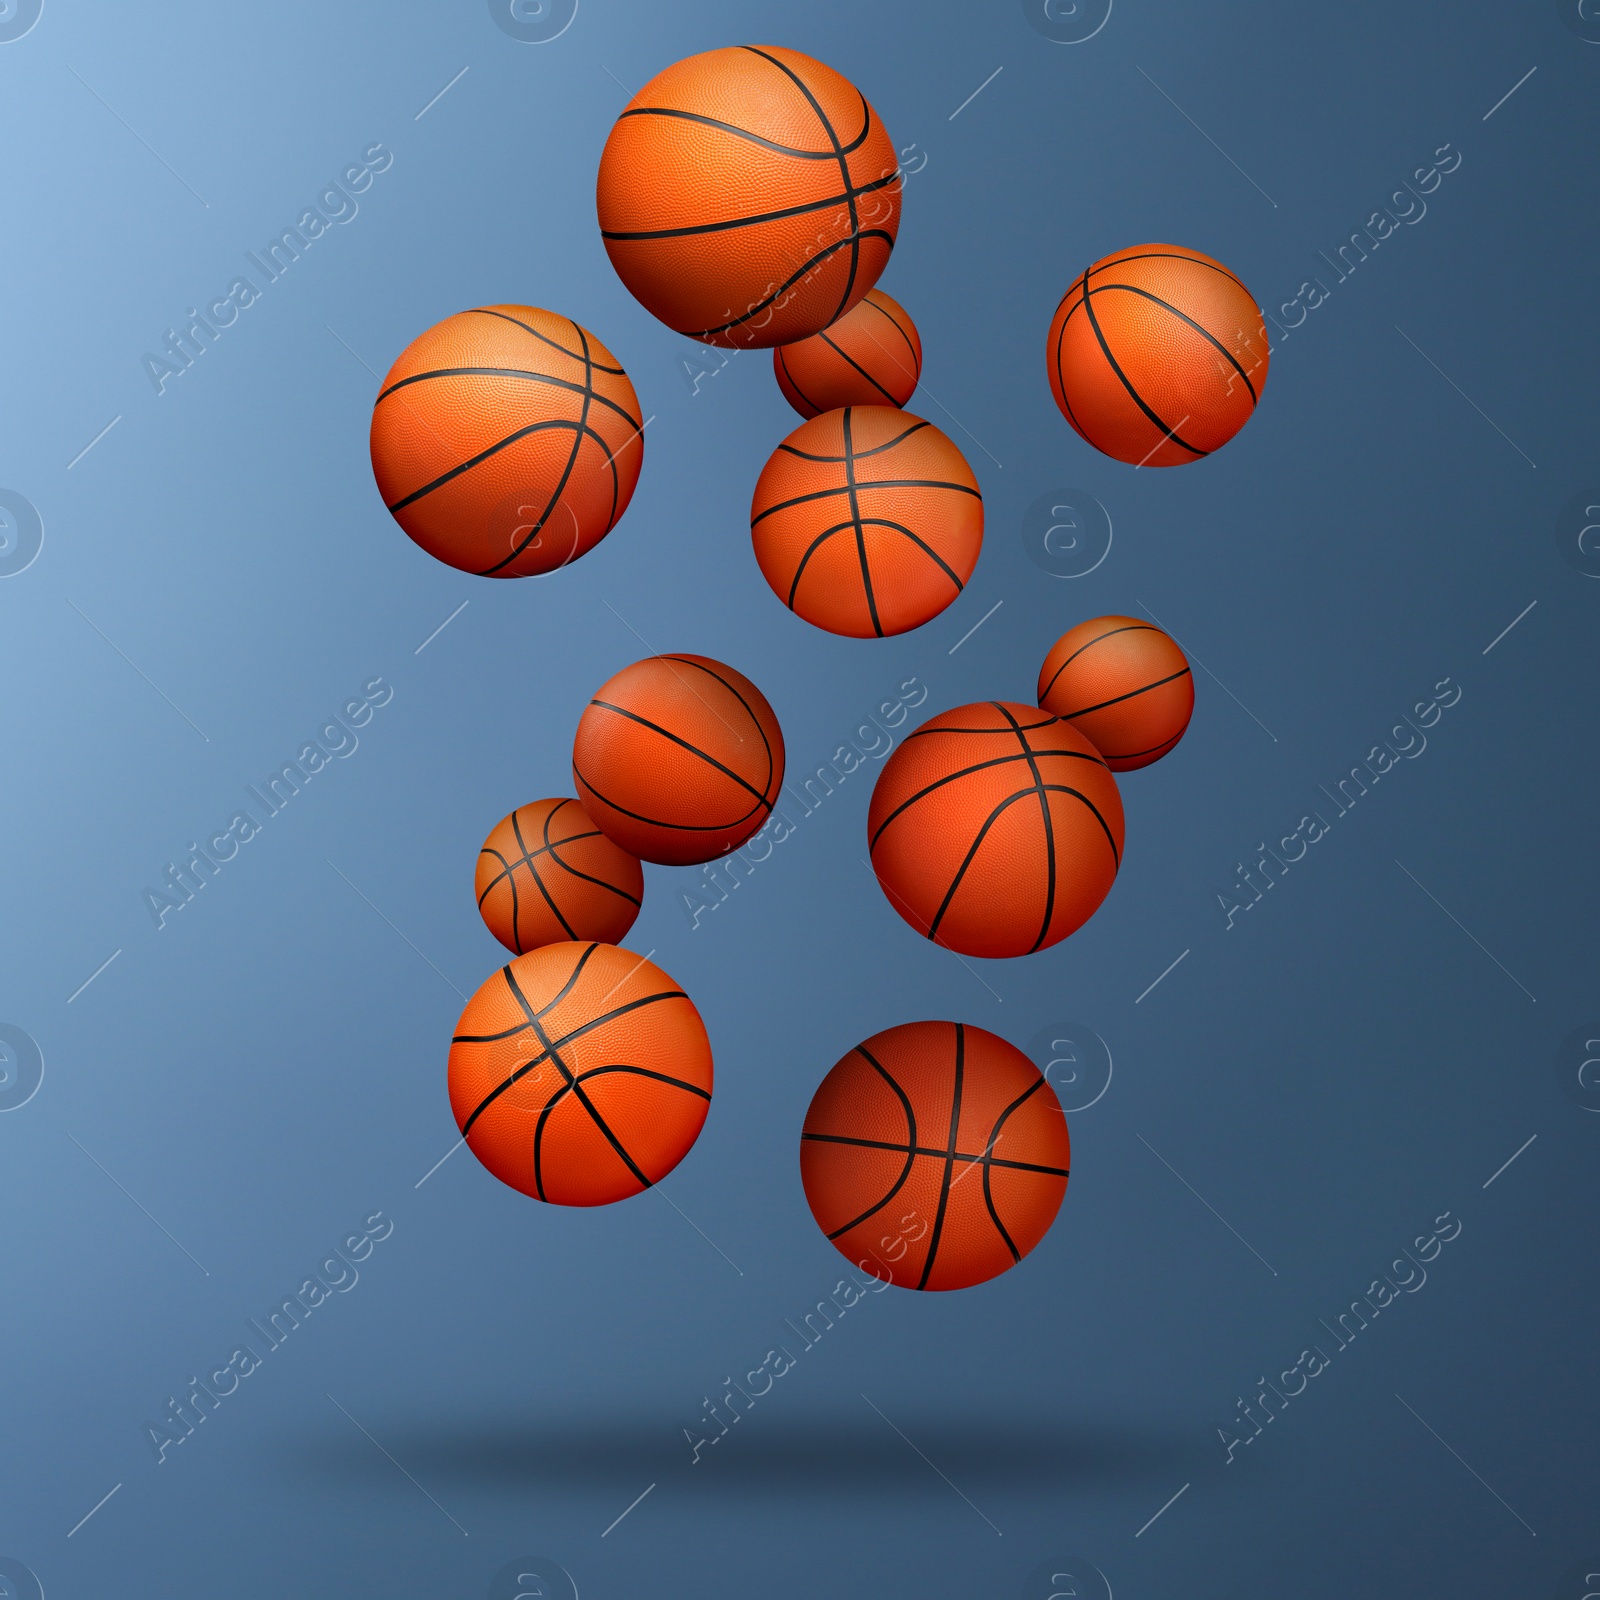 Image of Many basketball balls falling on steel blue gradient background